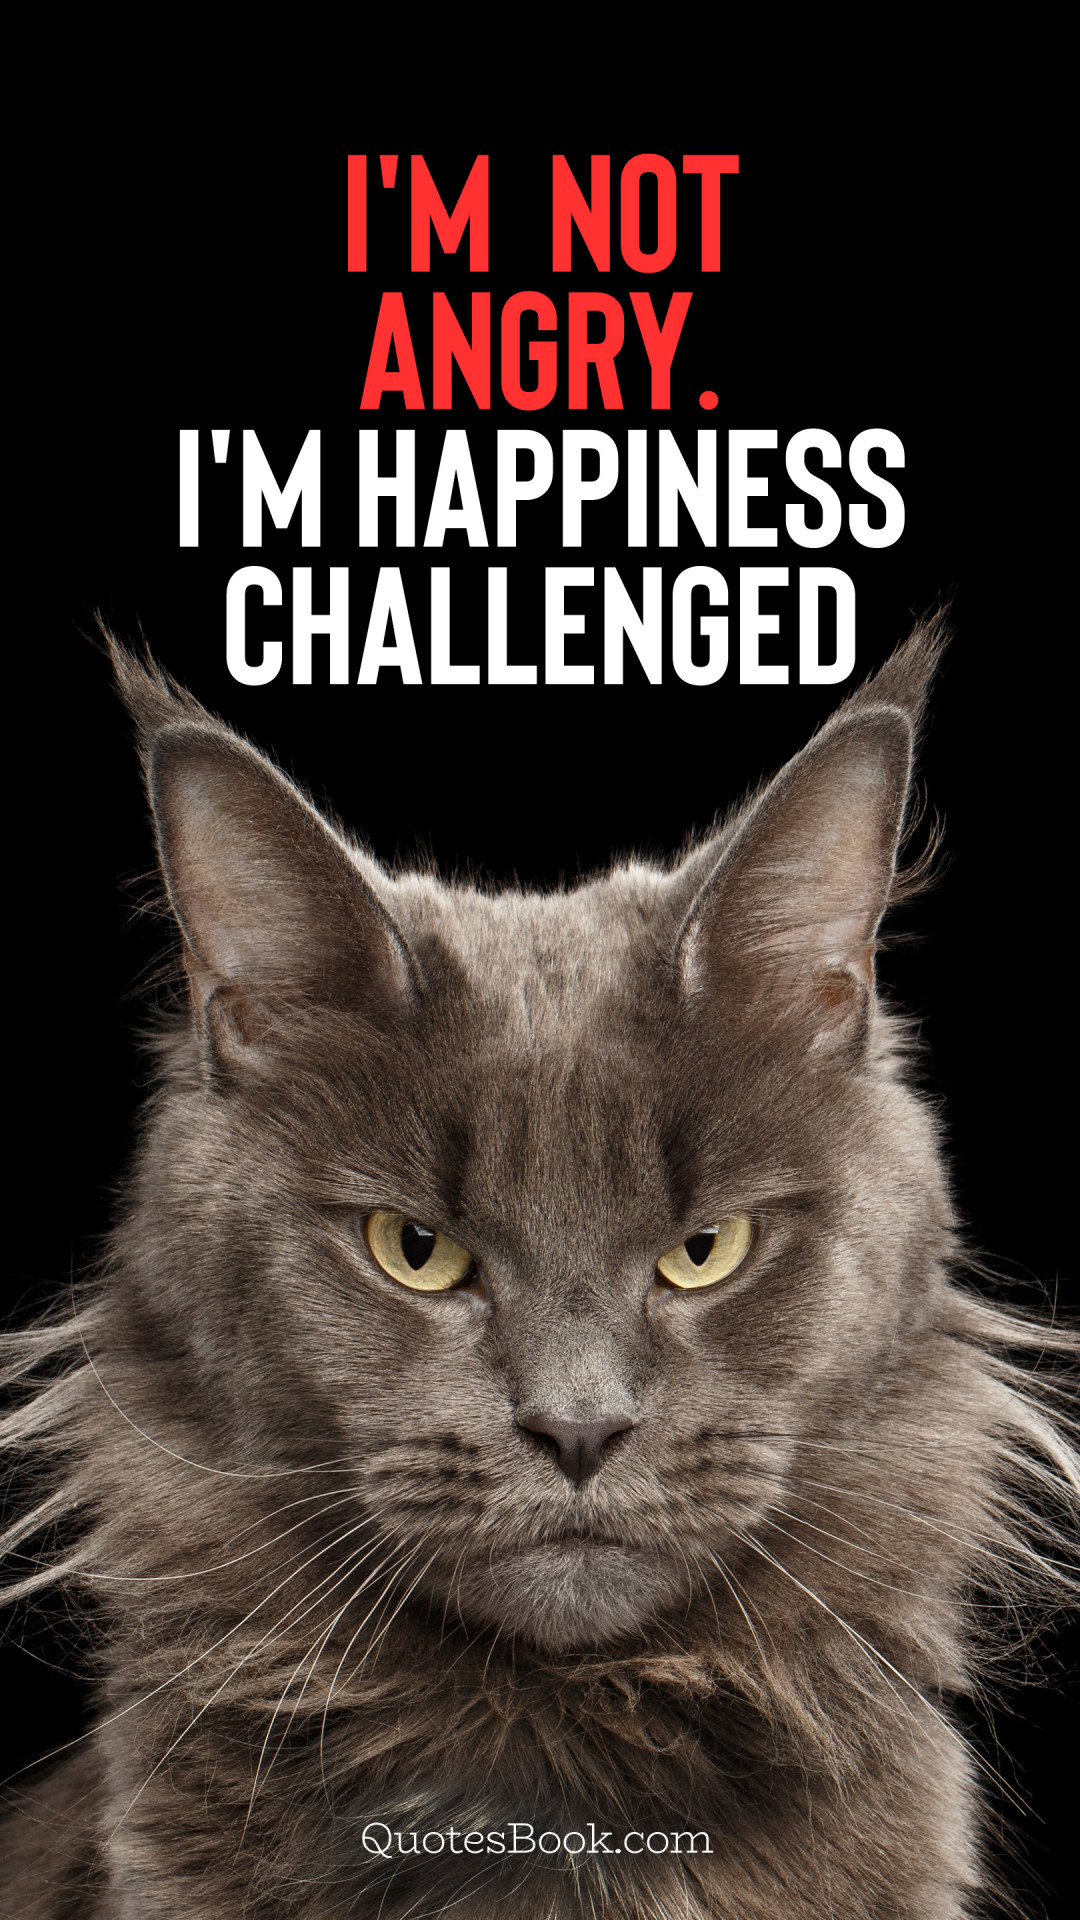 I'm not angry. I'm happiness challenged - QuotesBook